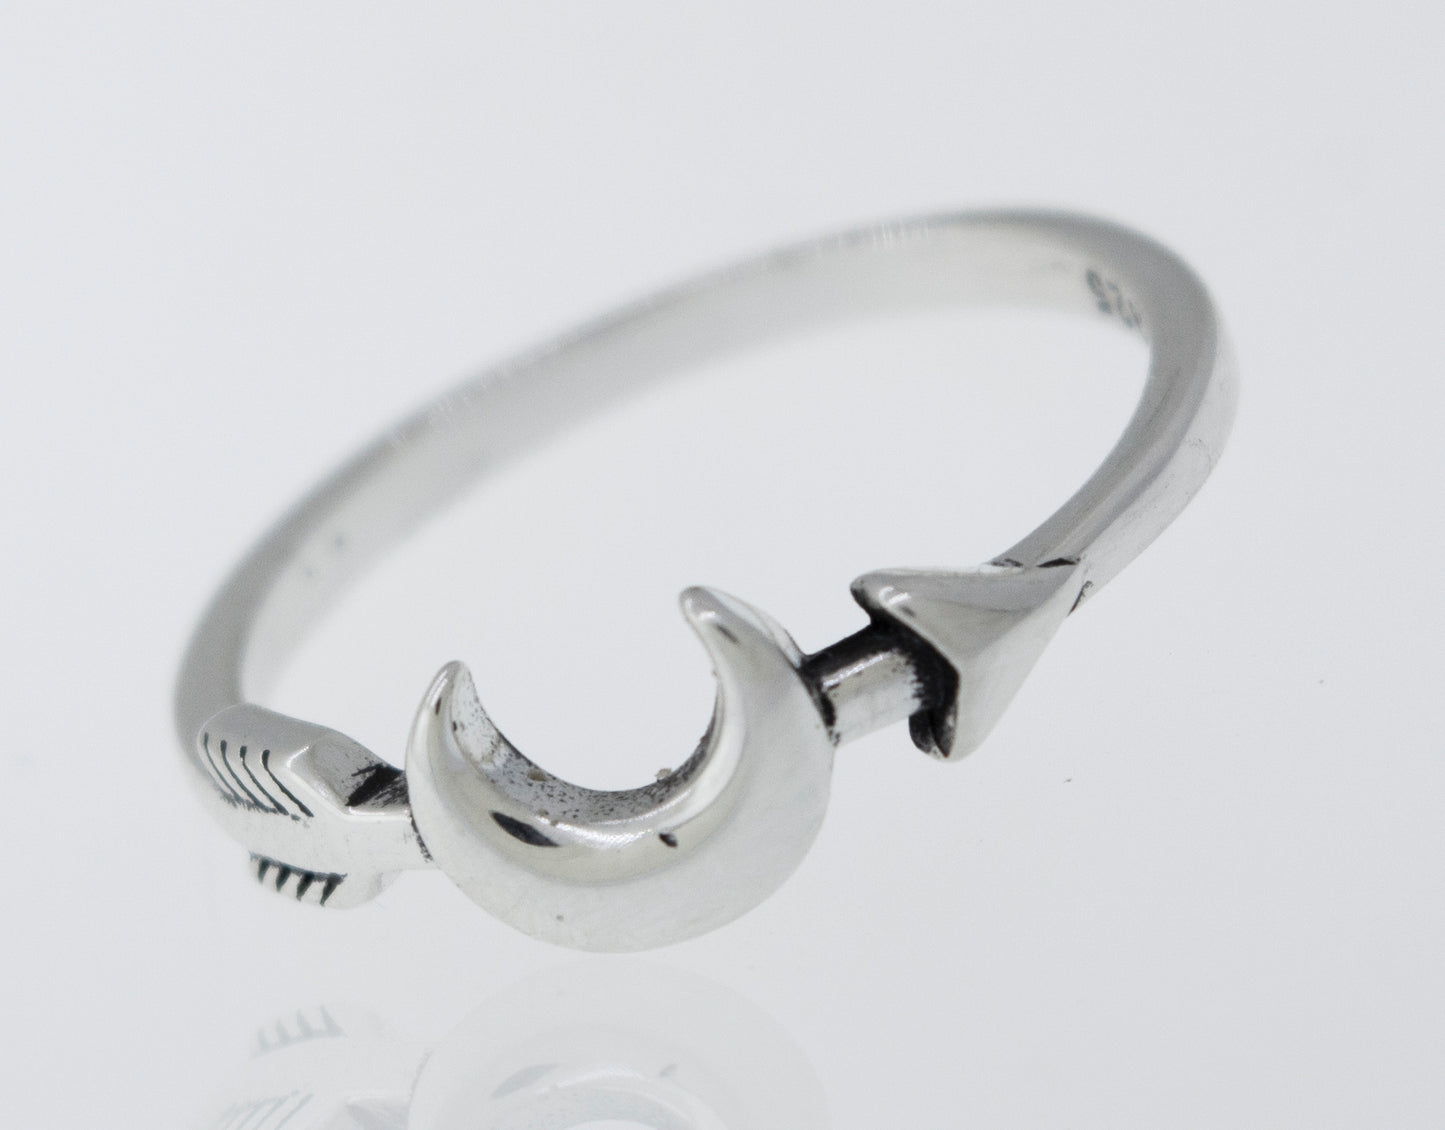 A Moon and Arrow Ring by Super Silver with an arrow design.